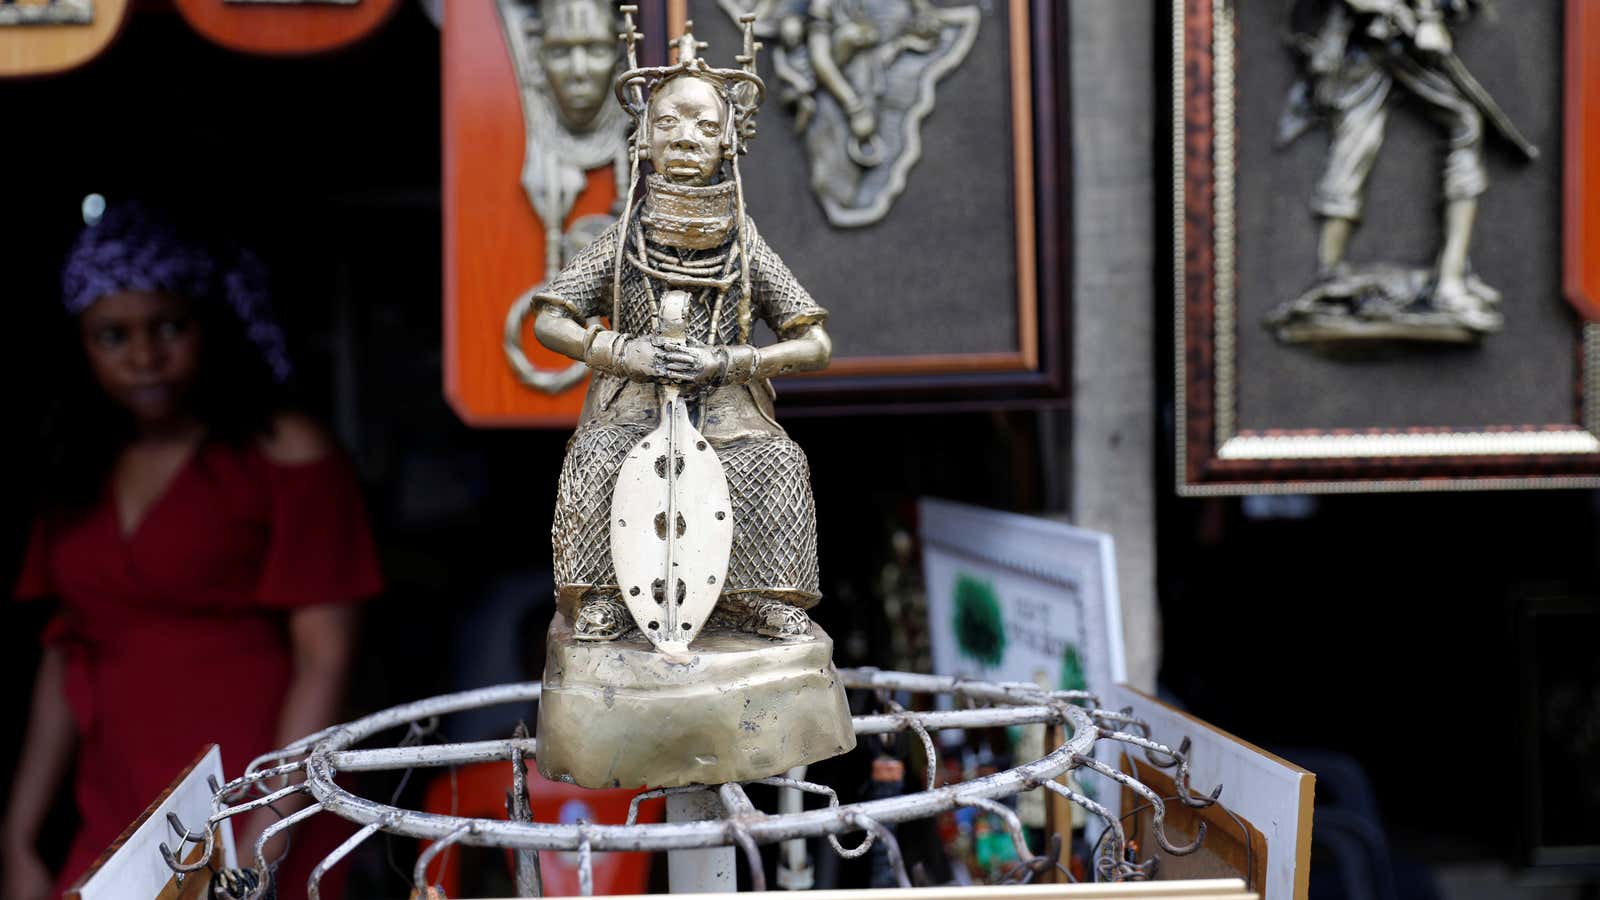 A bronze work is displayed for sale in front of a shop in Benin City, Edo state, Nigeria